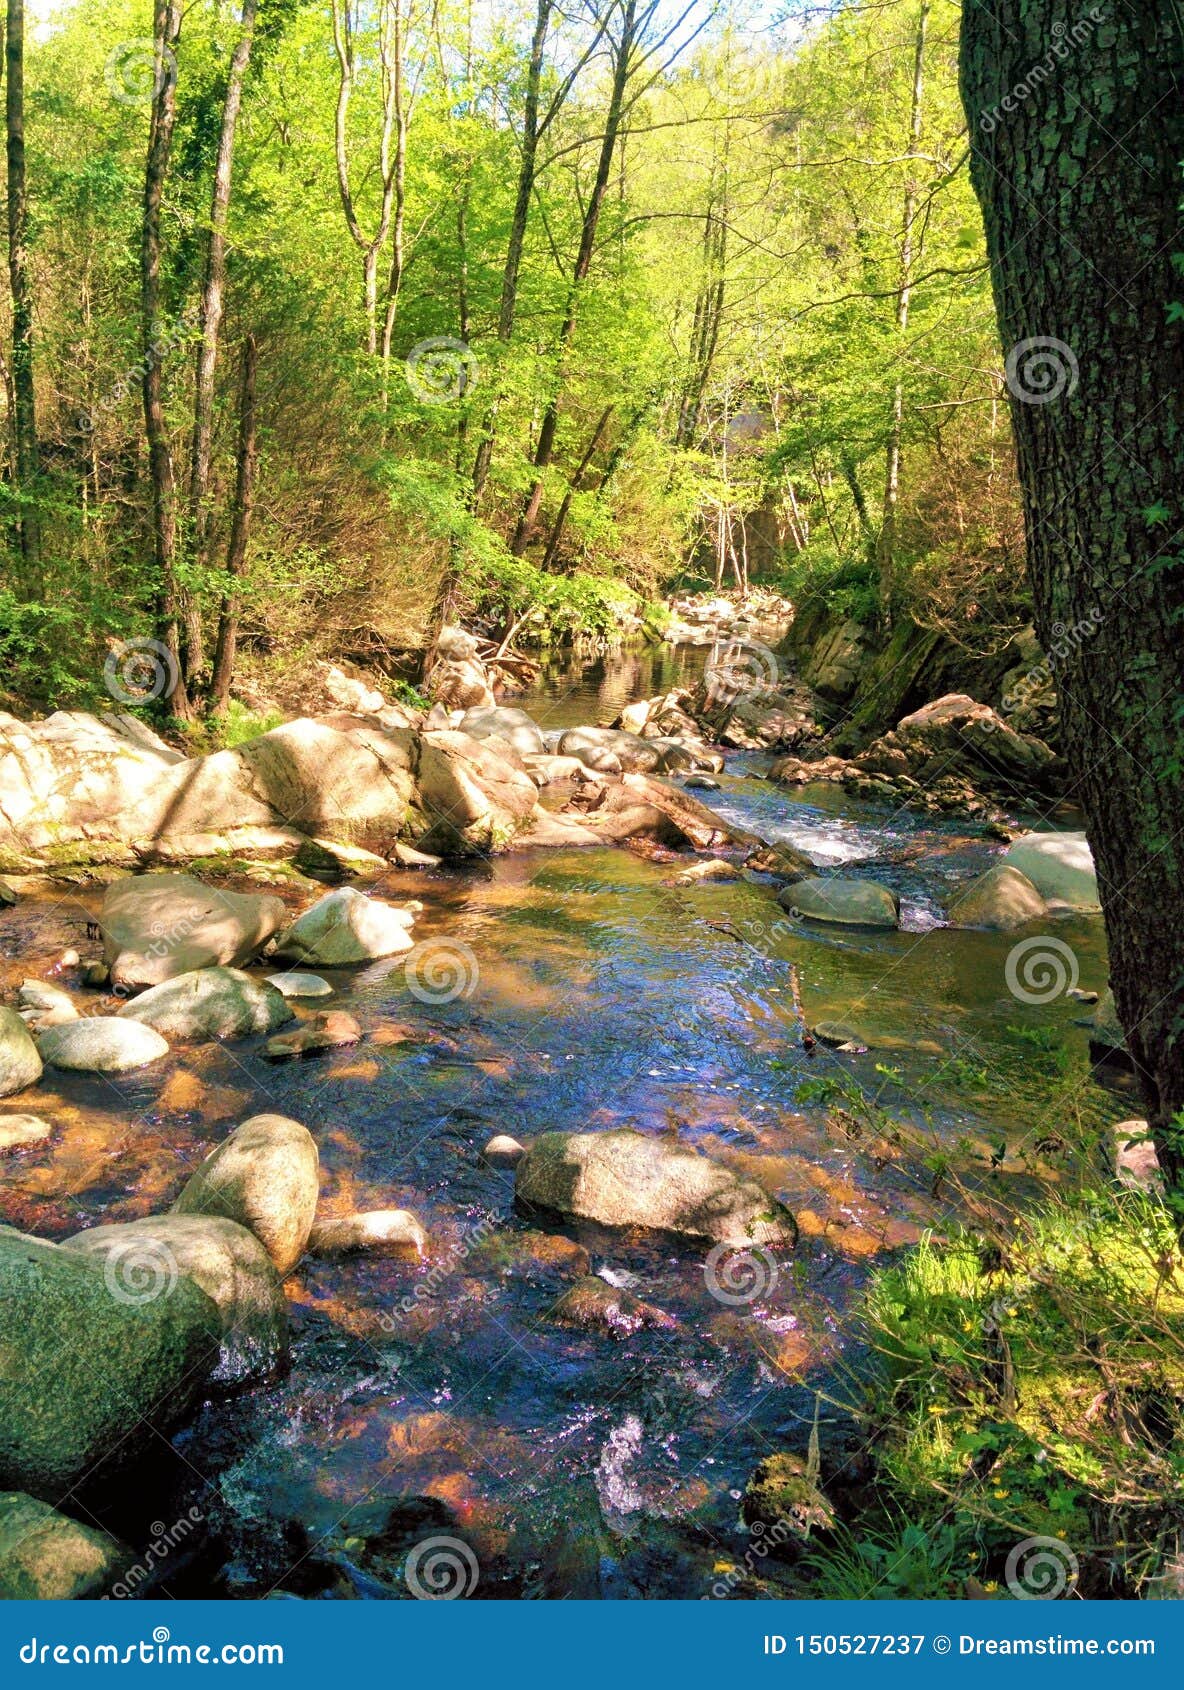 little river among the forest full of life